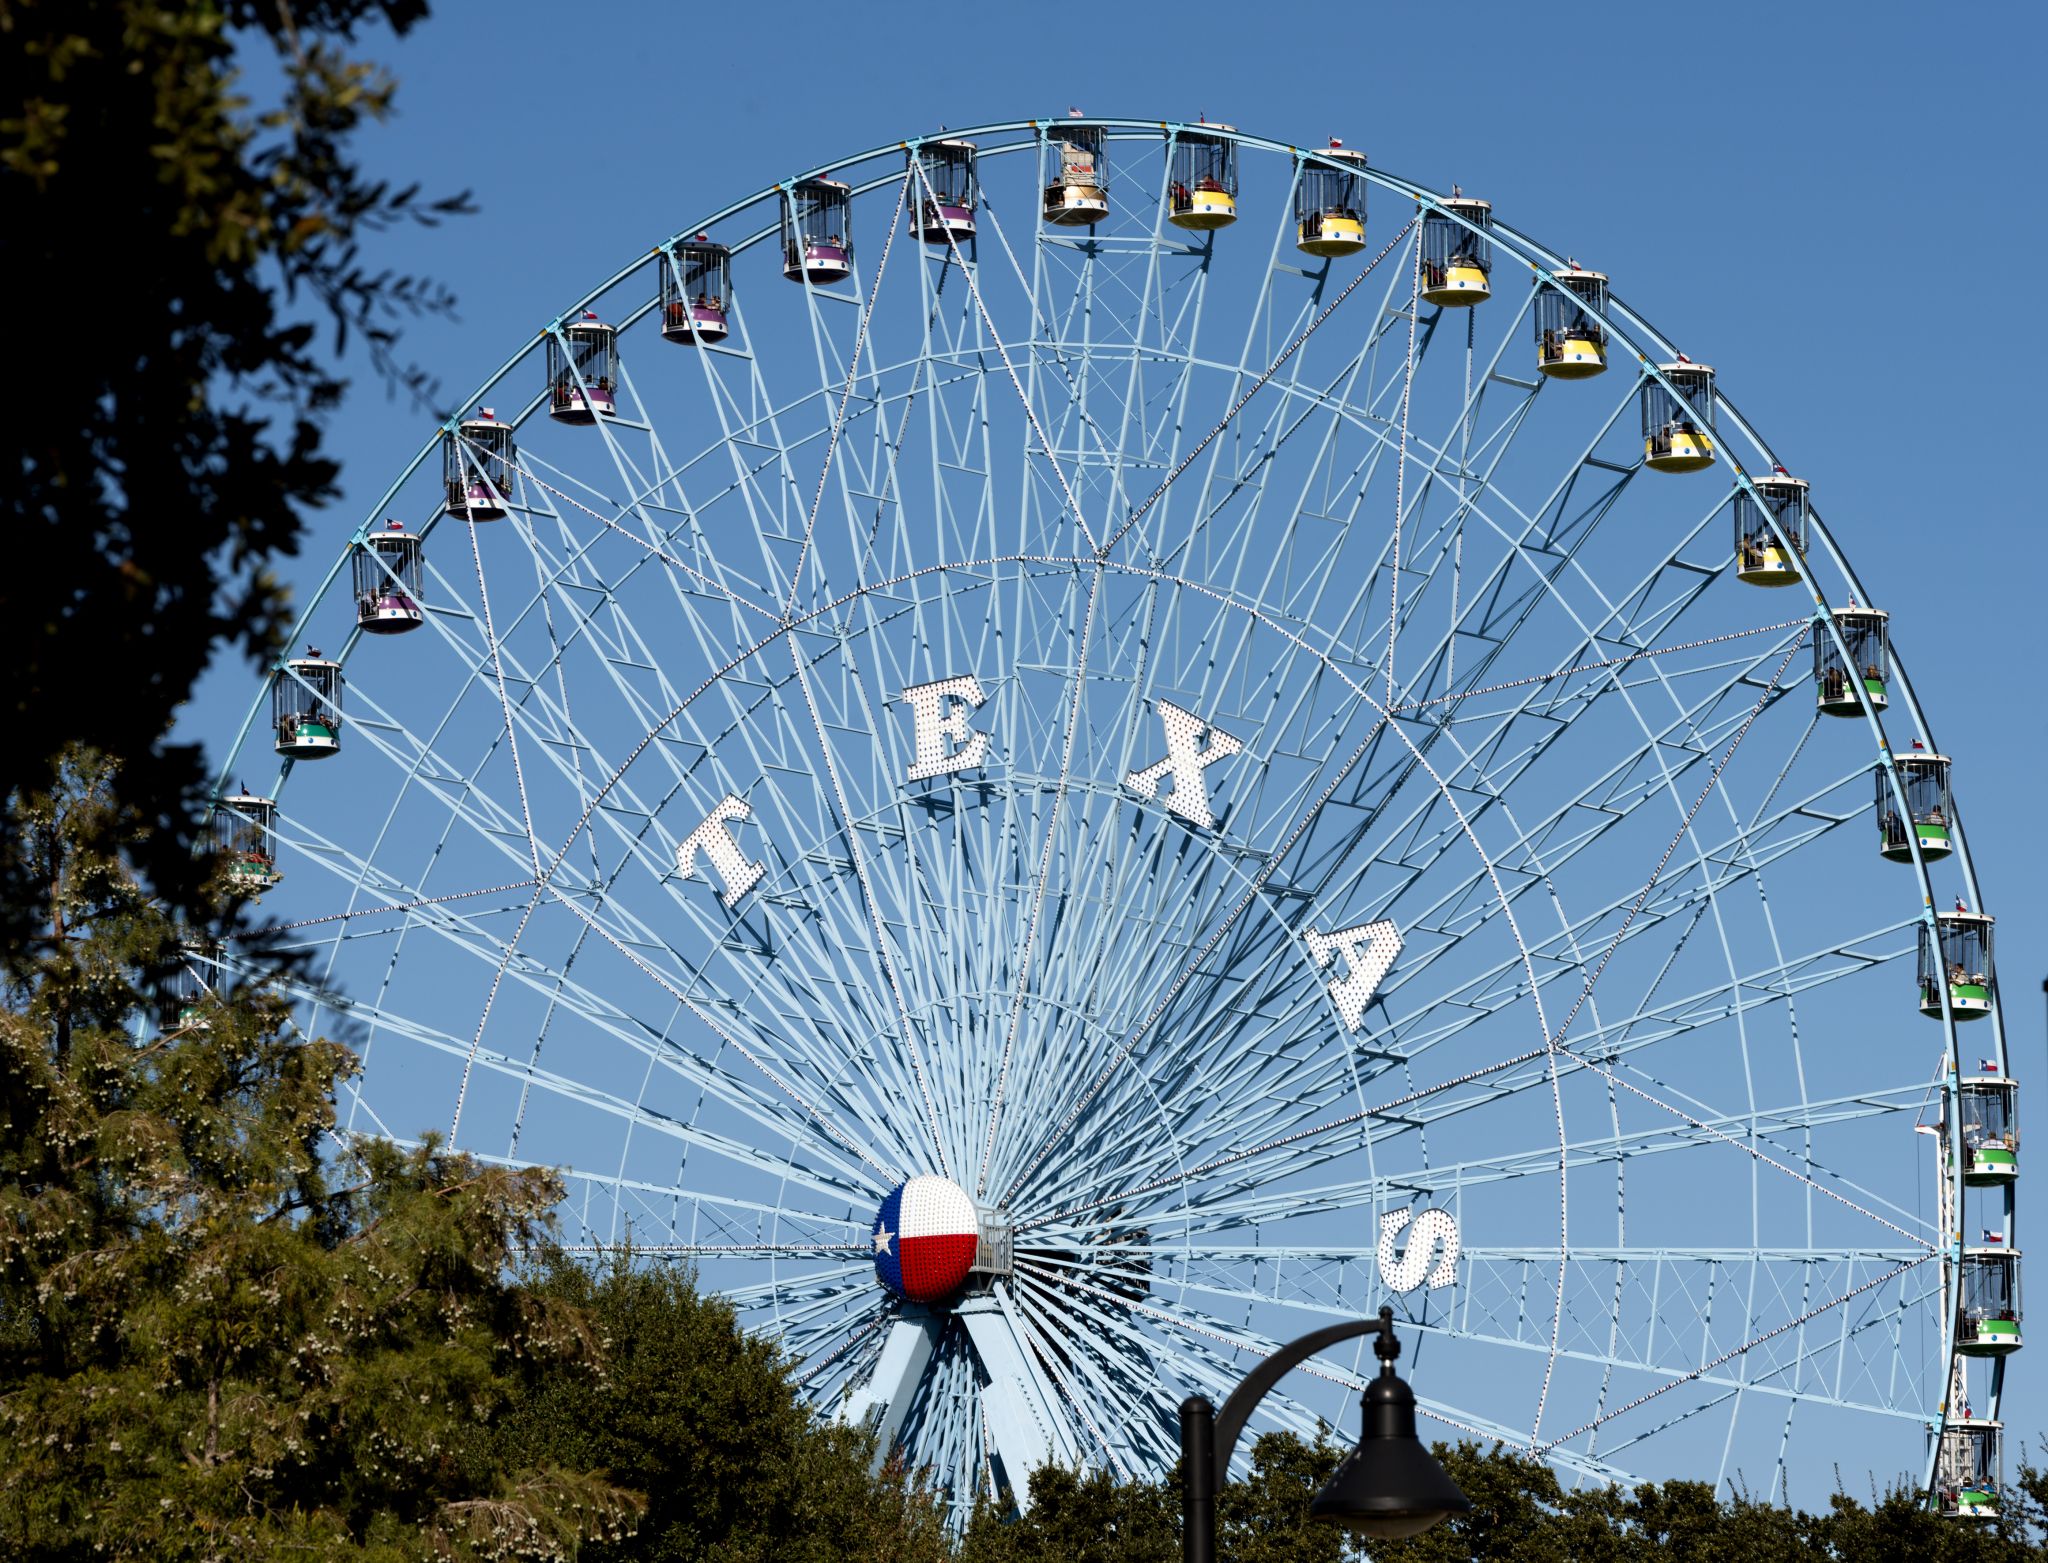 State Fair of Texas cancelled for first time since World War II due to COVID-19 concerns ...